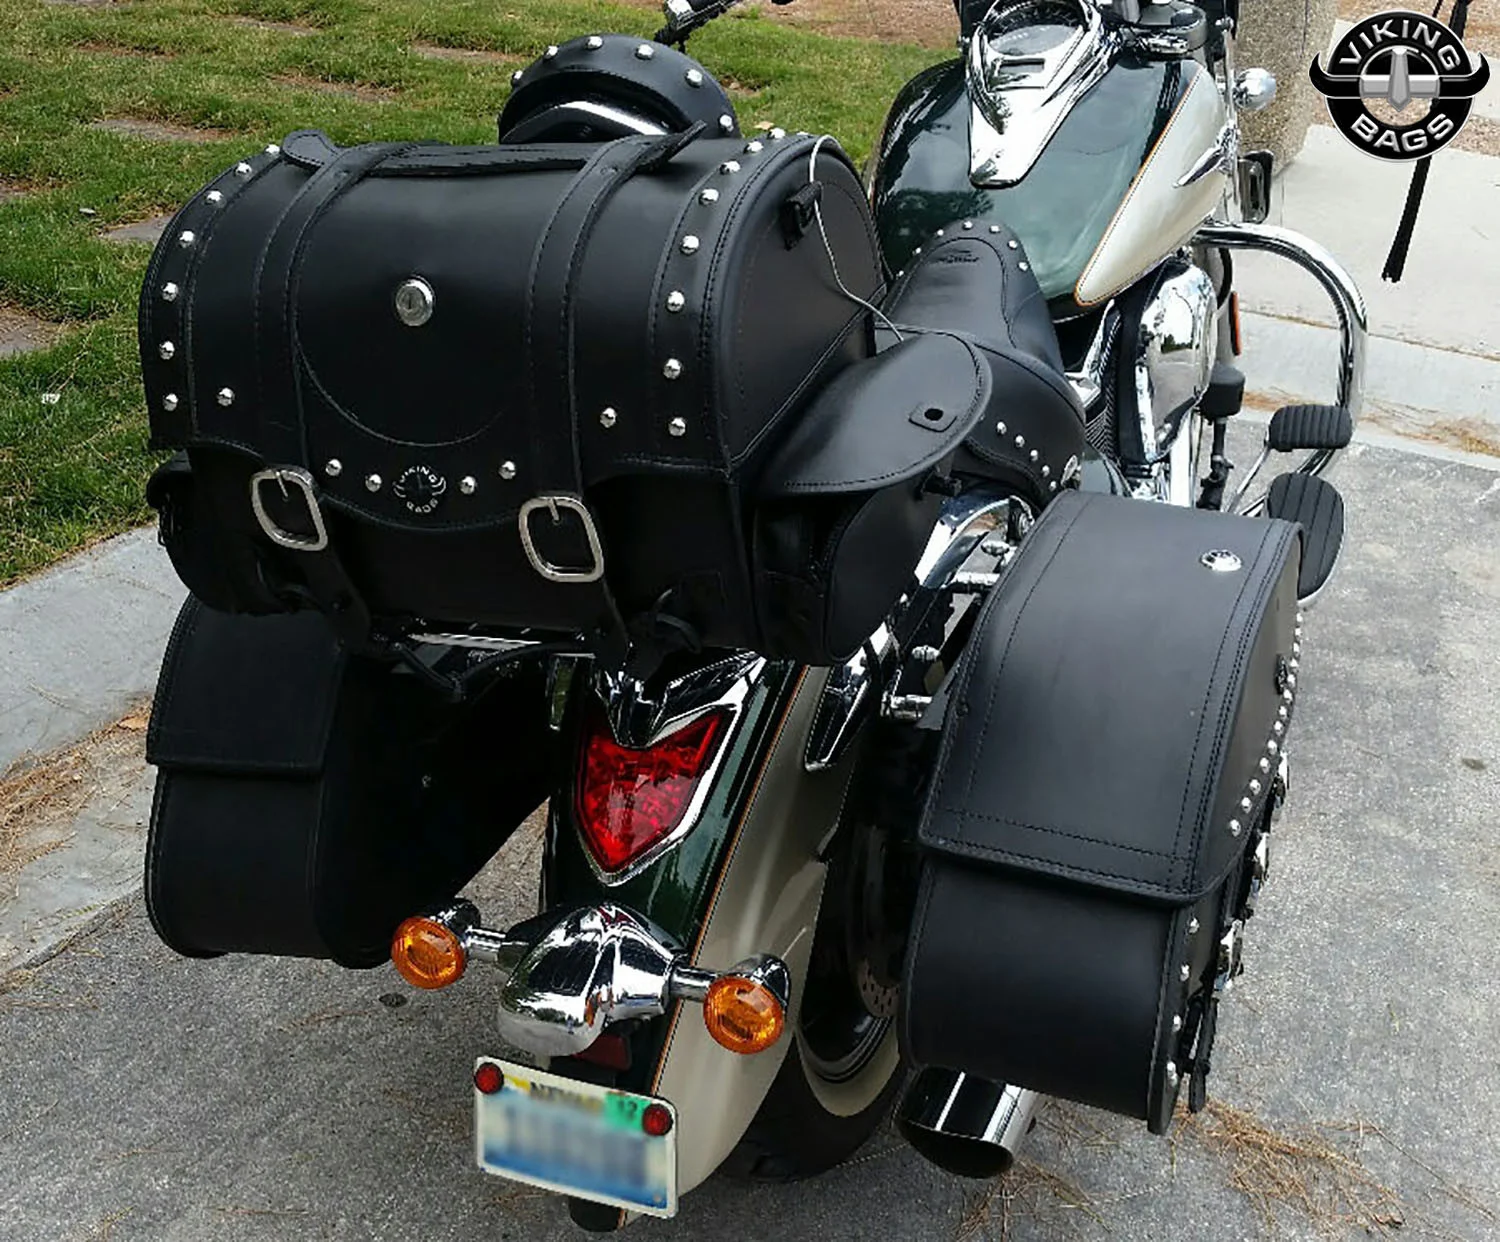 Motorcycle Luggage for Illinois Motorcycle Tour